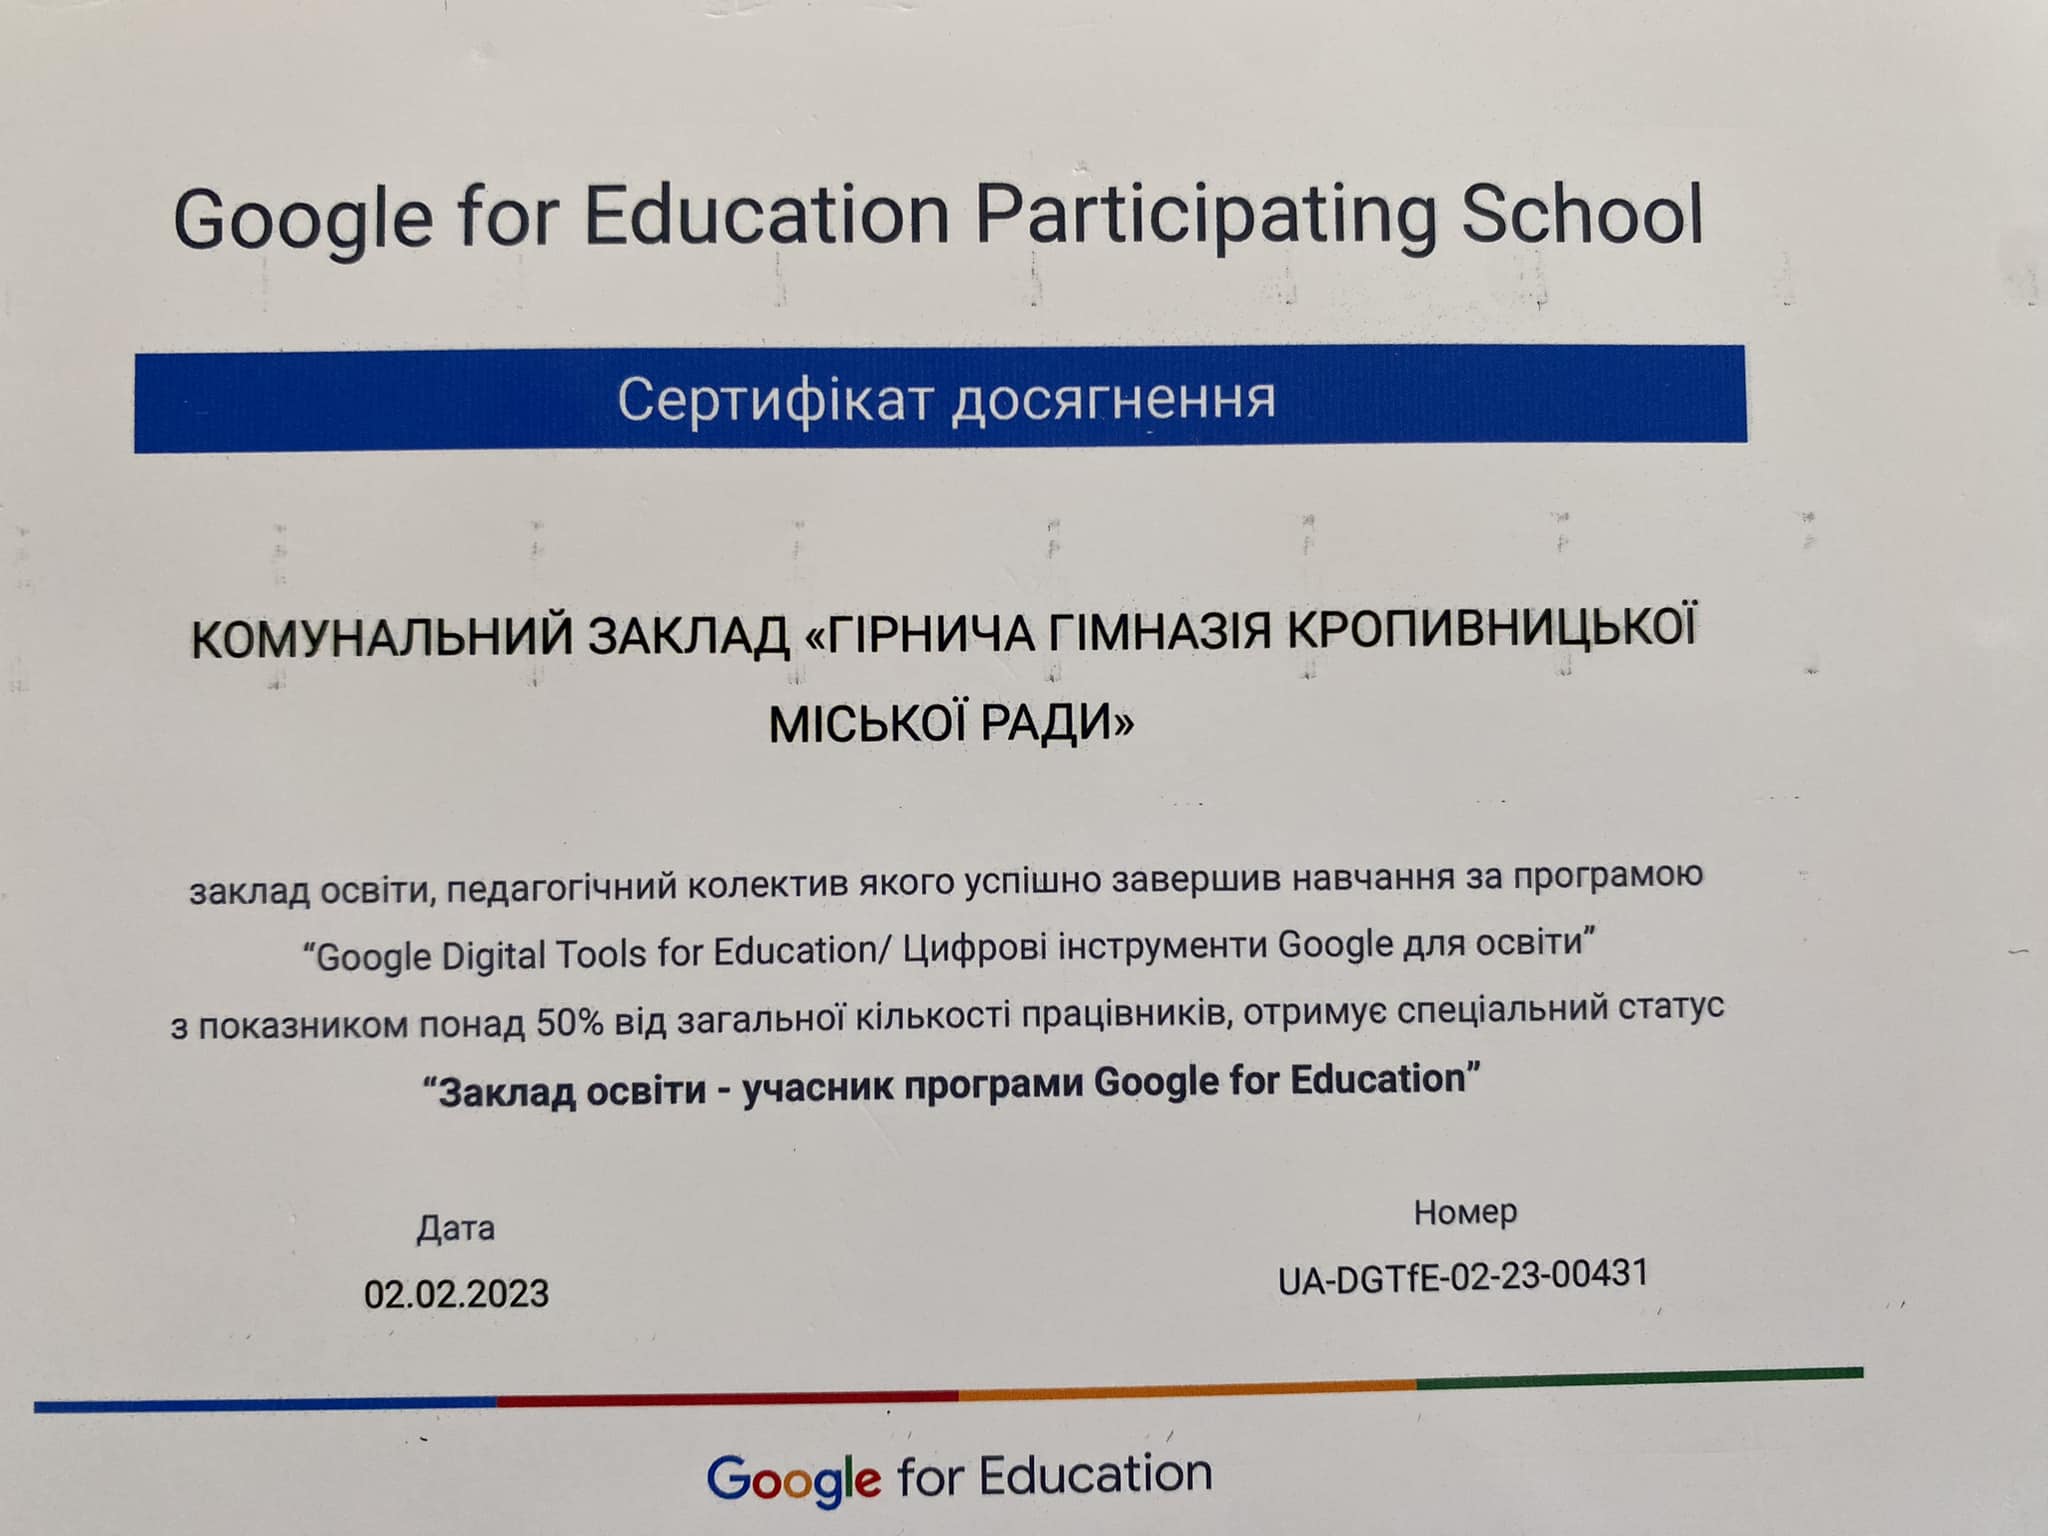 Google for Education Participating School